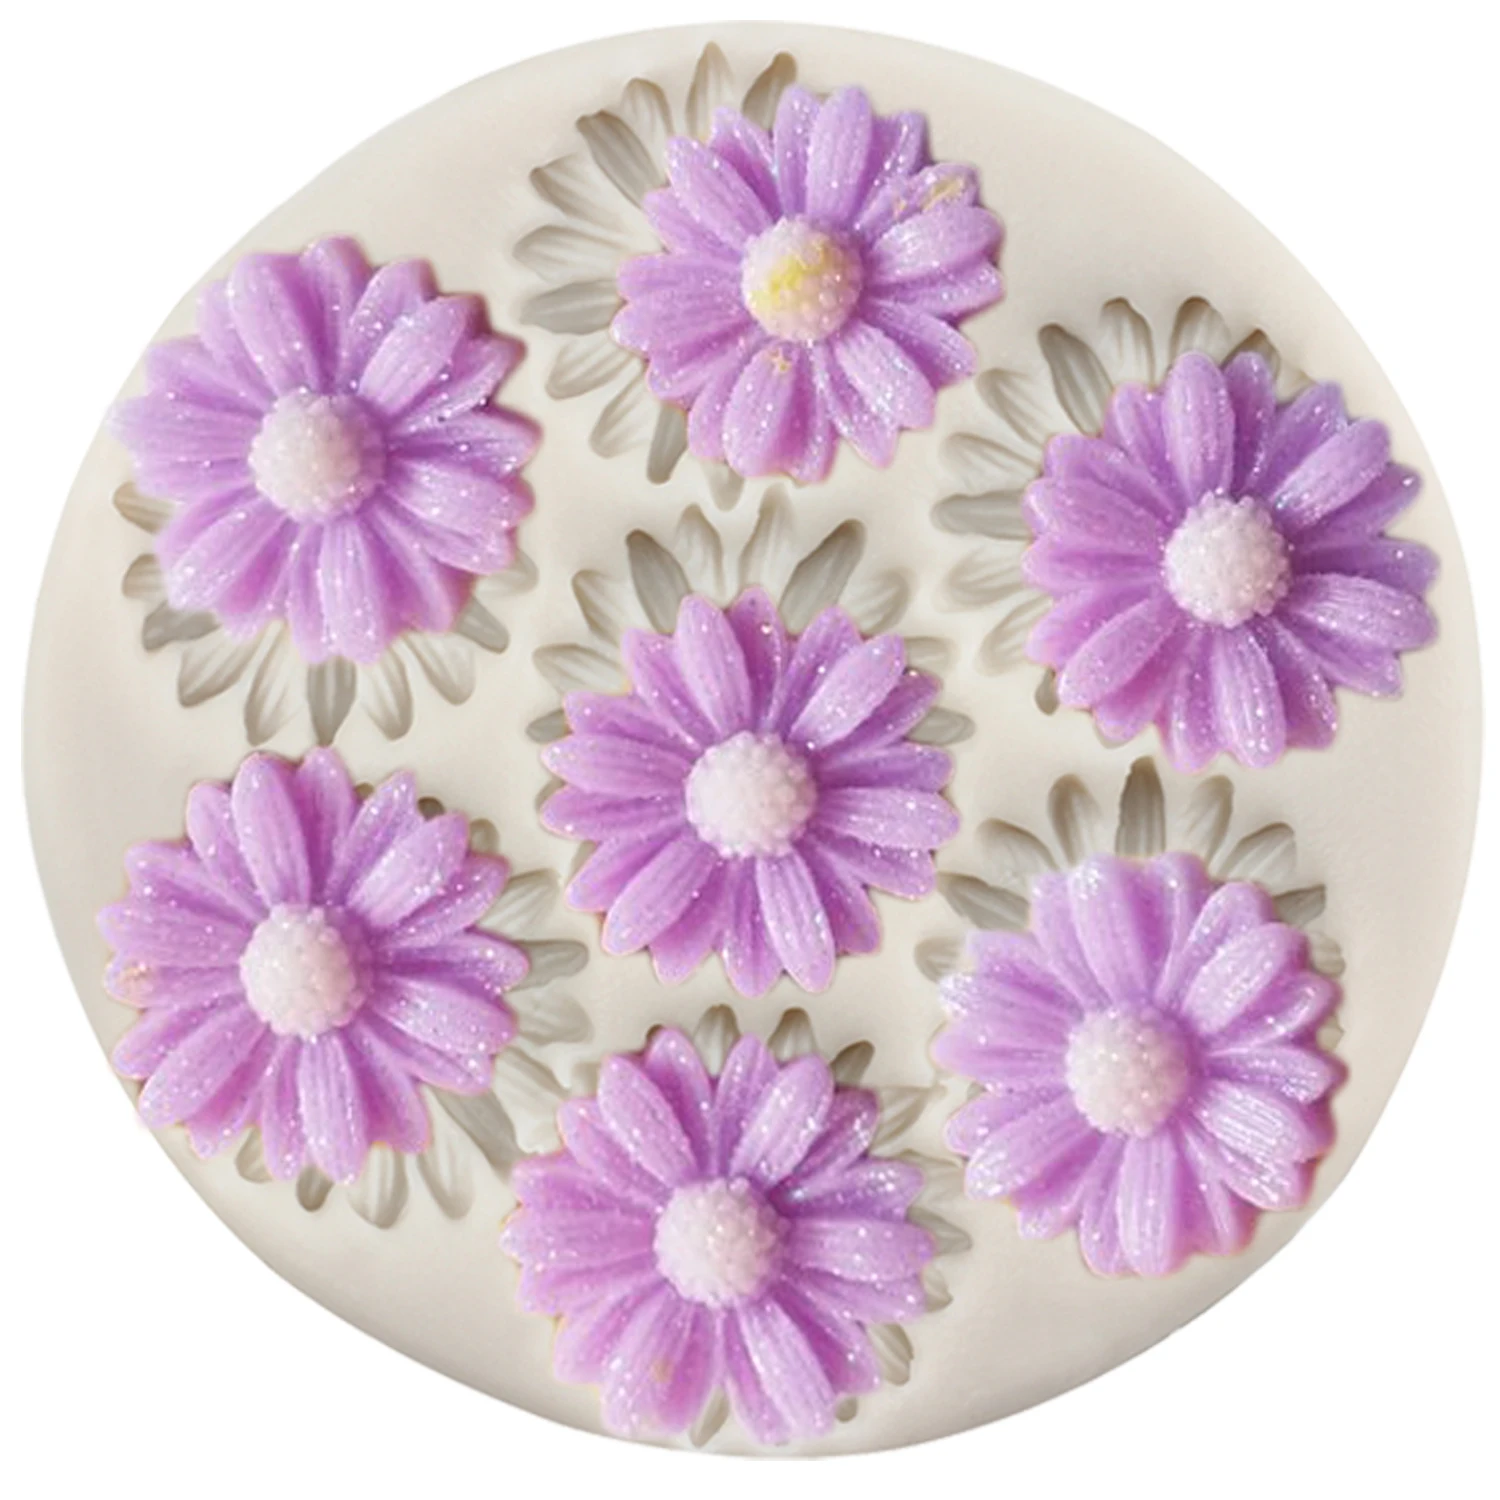 Daisy Silicone Mold Flower Candy Clay Chocolate Gumpaste Molds DIY Wedding Cupcake Topper Fondant Cake Decorating Tools